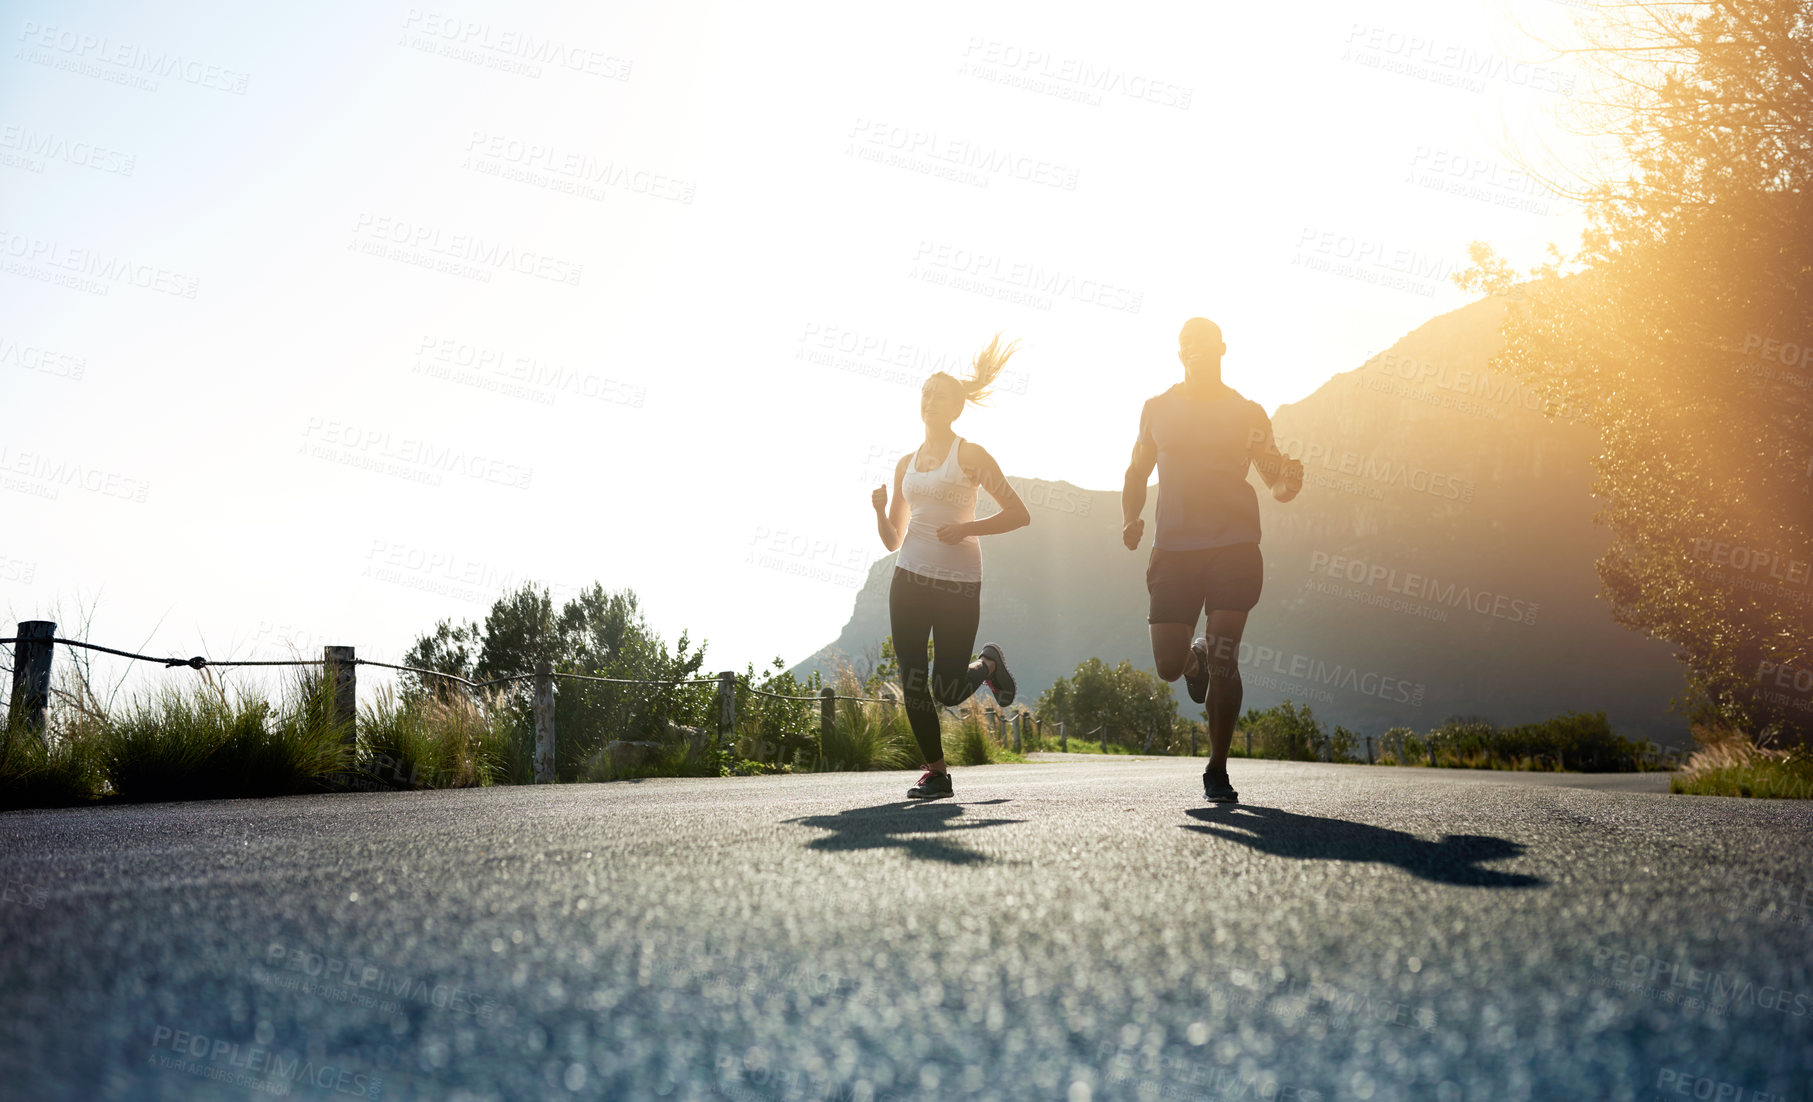 Buy stock photo Low angle shot of two people running on a tarmac road